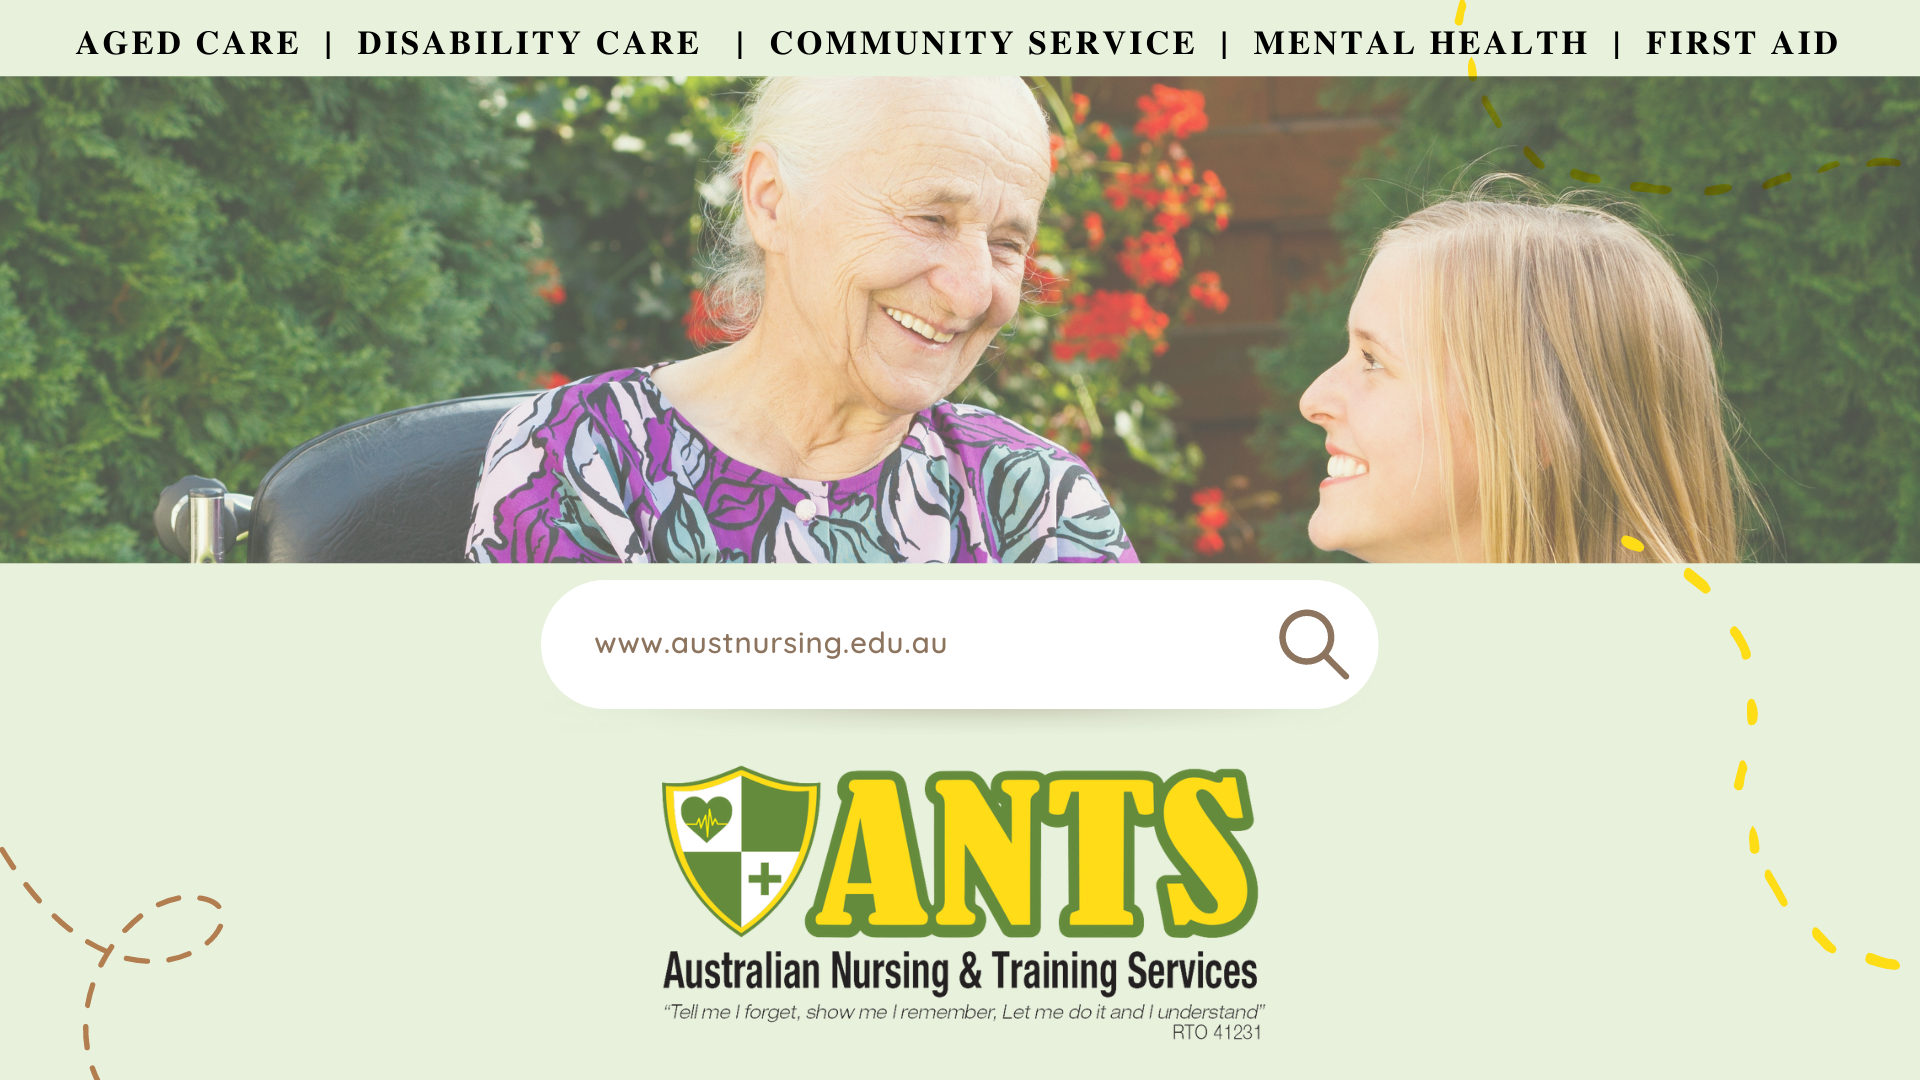 Why Aged Care Work Offers More than Just a Paycheck - ANTZ